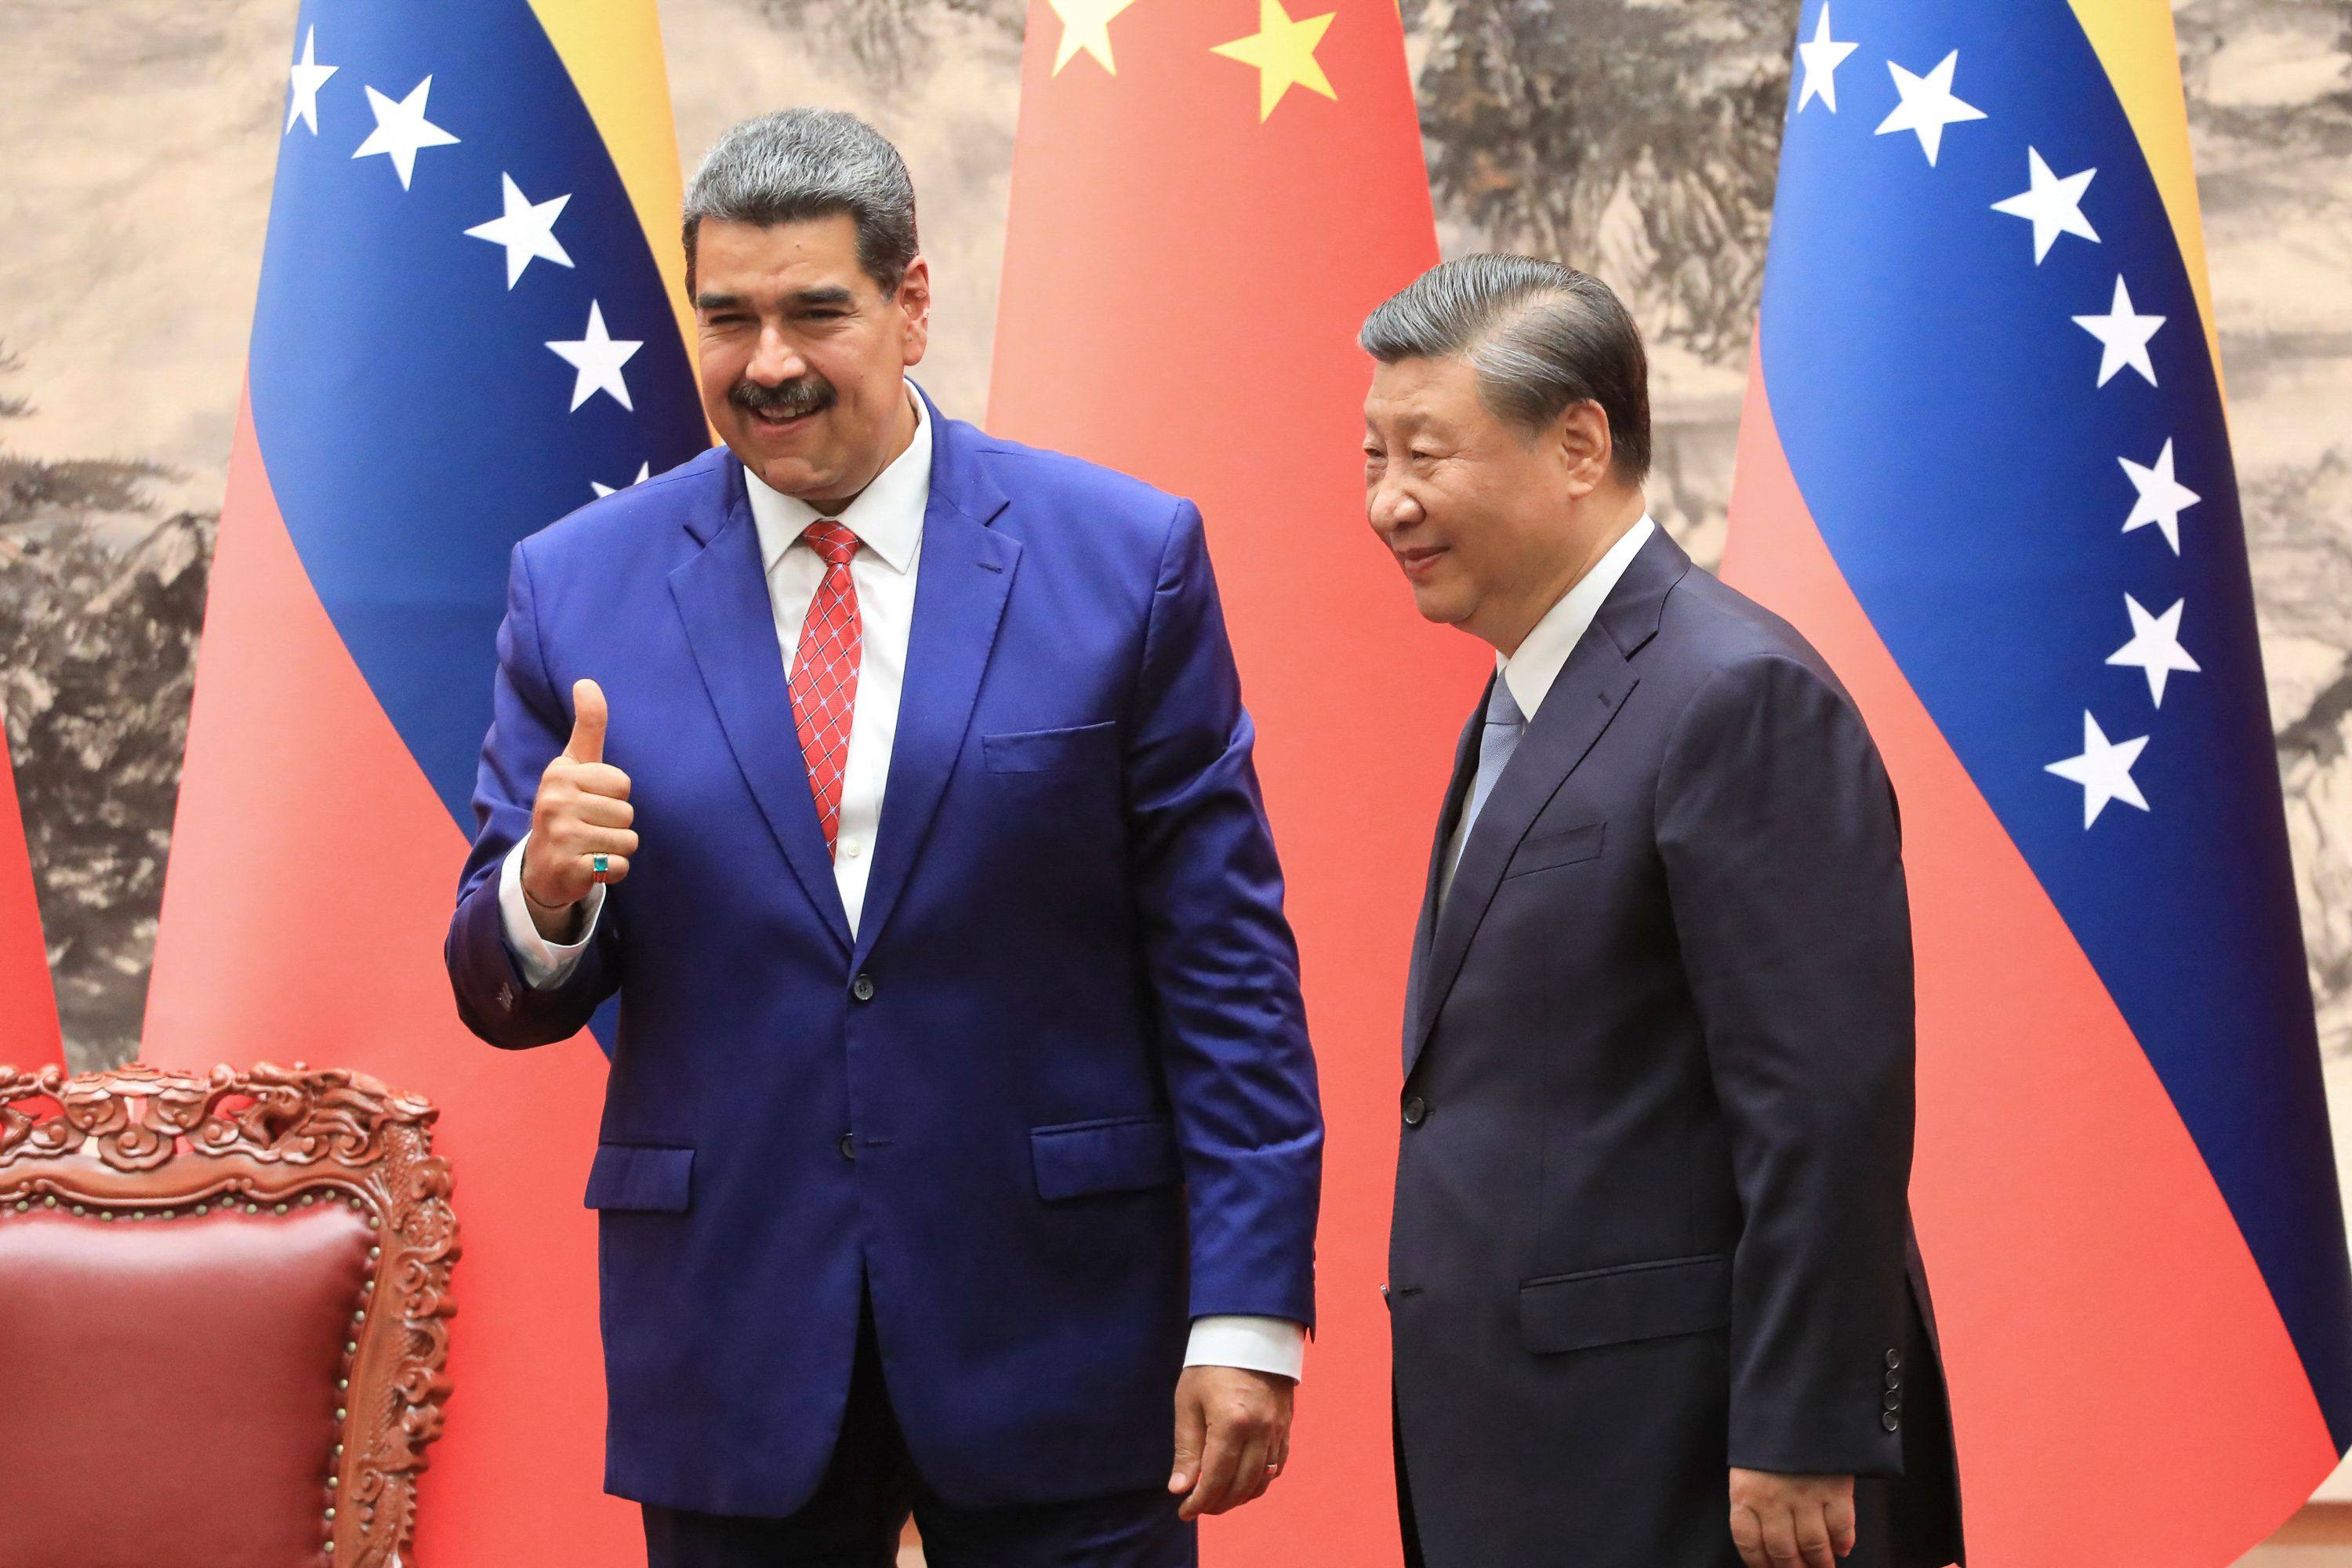 Venezuelan President Nicolas Maduro meets Chinese President Xi Jinping in Beijing on September Wednesday where they agreed to deepen their collaboration on space projects, according to a joint statement by the two governments. Photo: Venezuelan Presidency / AFP